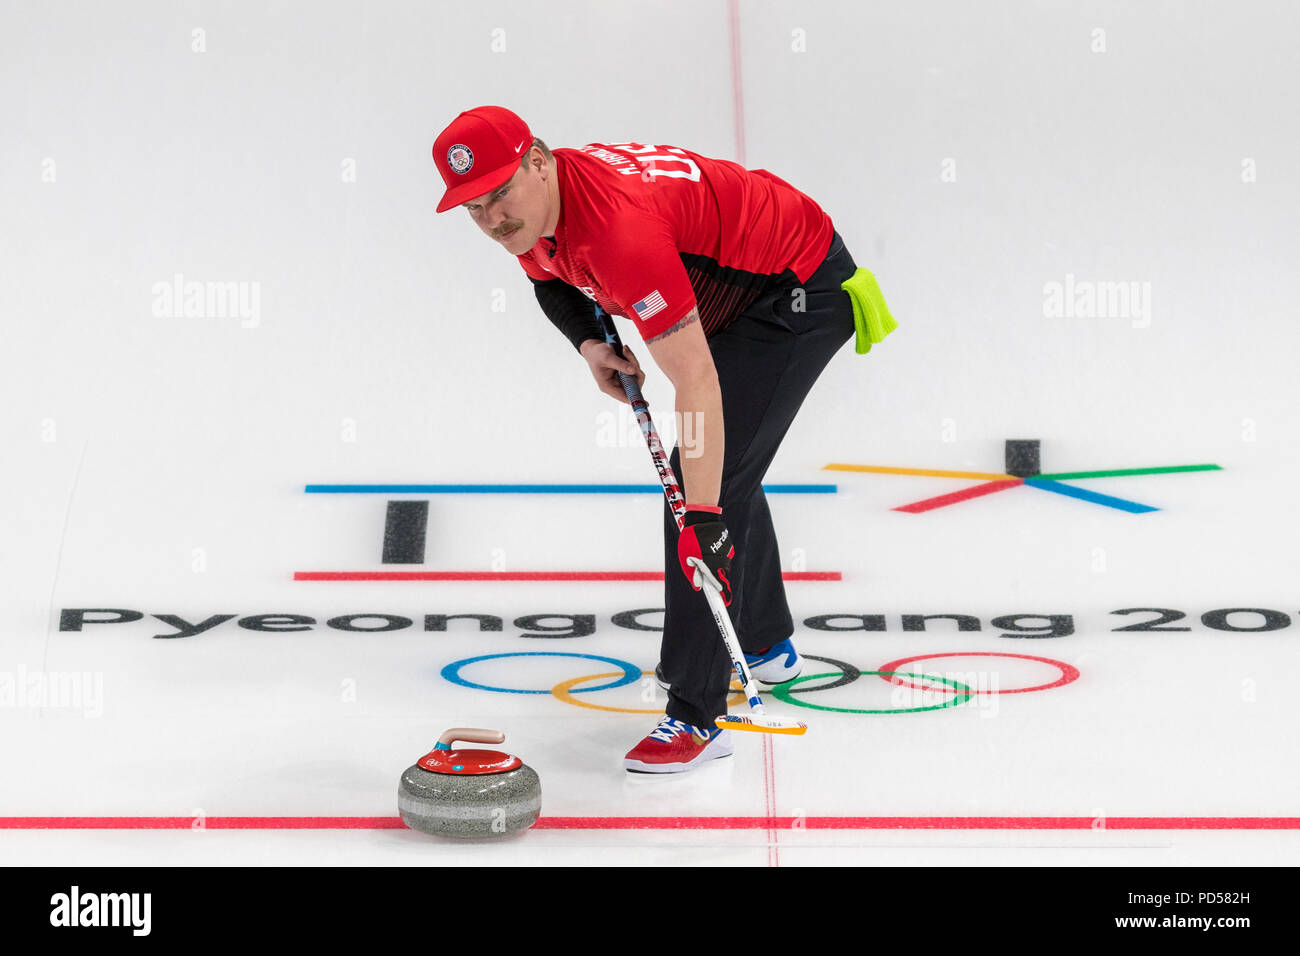 Matt Hamilton (USA) competing in the Mixed Doubles Curling round robin ...